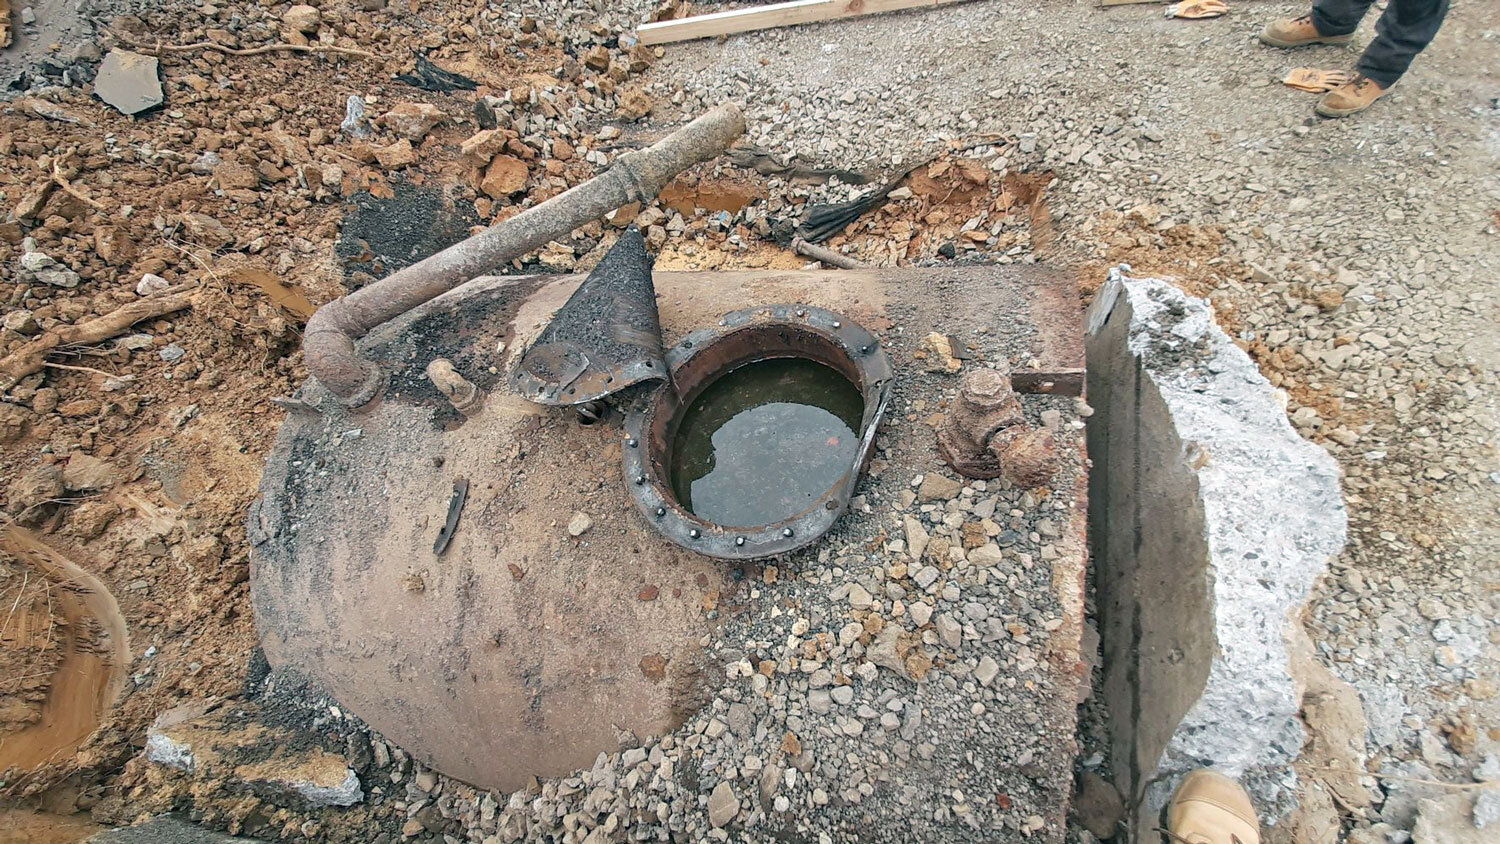 The old boiler was found with contaminated materials inside